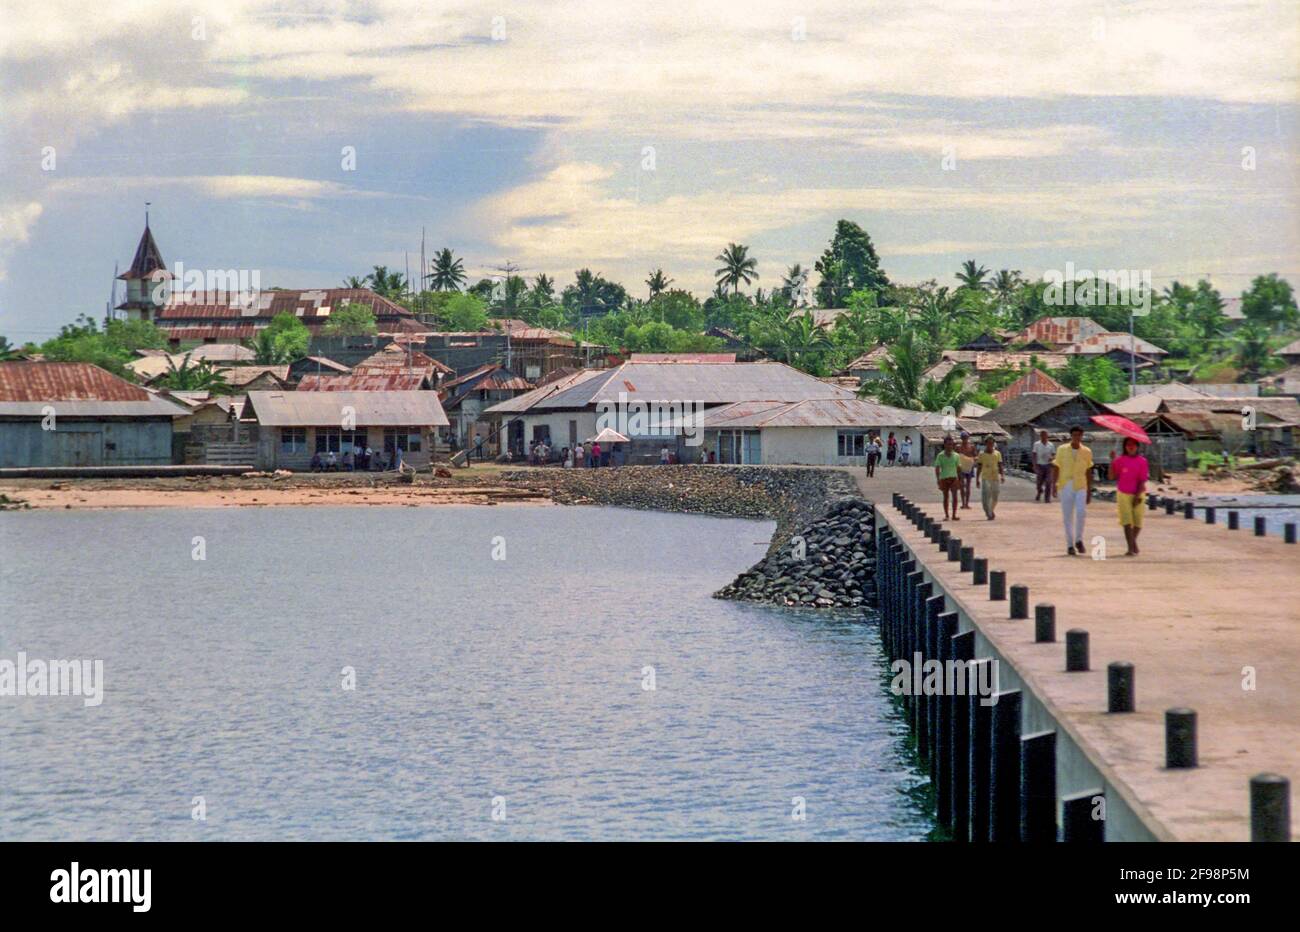 The wharf at Daruba, the main settlement on Morotai, a sparsely-developed island in the Halmahera group of eastern Indonesia's Maluku Islands (1989). In 1945  this remote island - now rarely visited by outsiders - became a major staging point in the Pacific Campaign as Allied forces mopped up the occupying Japanese forces.  Thousands of Allied servicemen passed through the base on the island's southern extremity. Stock Photo